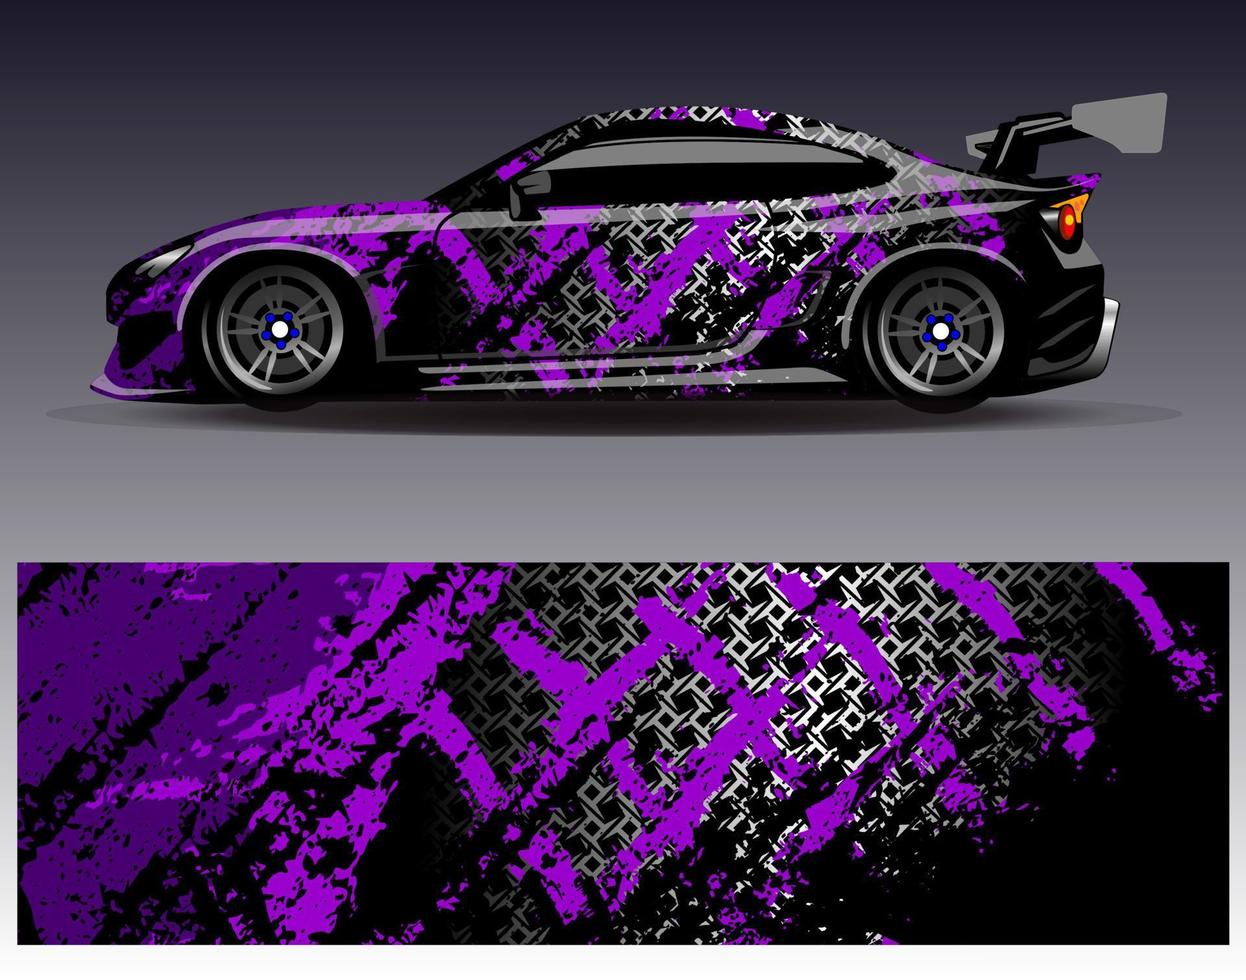 Car wrap design vector. Graphic abstract stripe racing background kit designs for wrap vehicle  race car  rally  adventure and livery vector